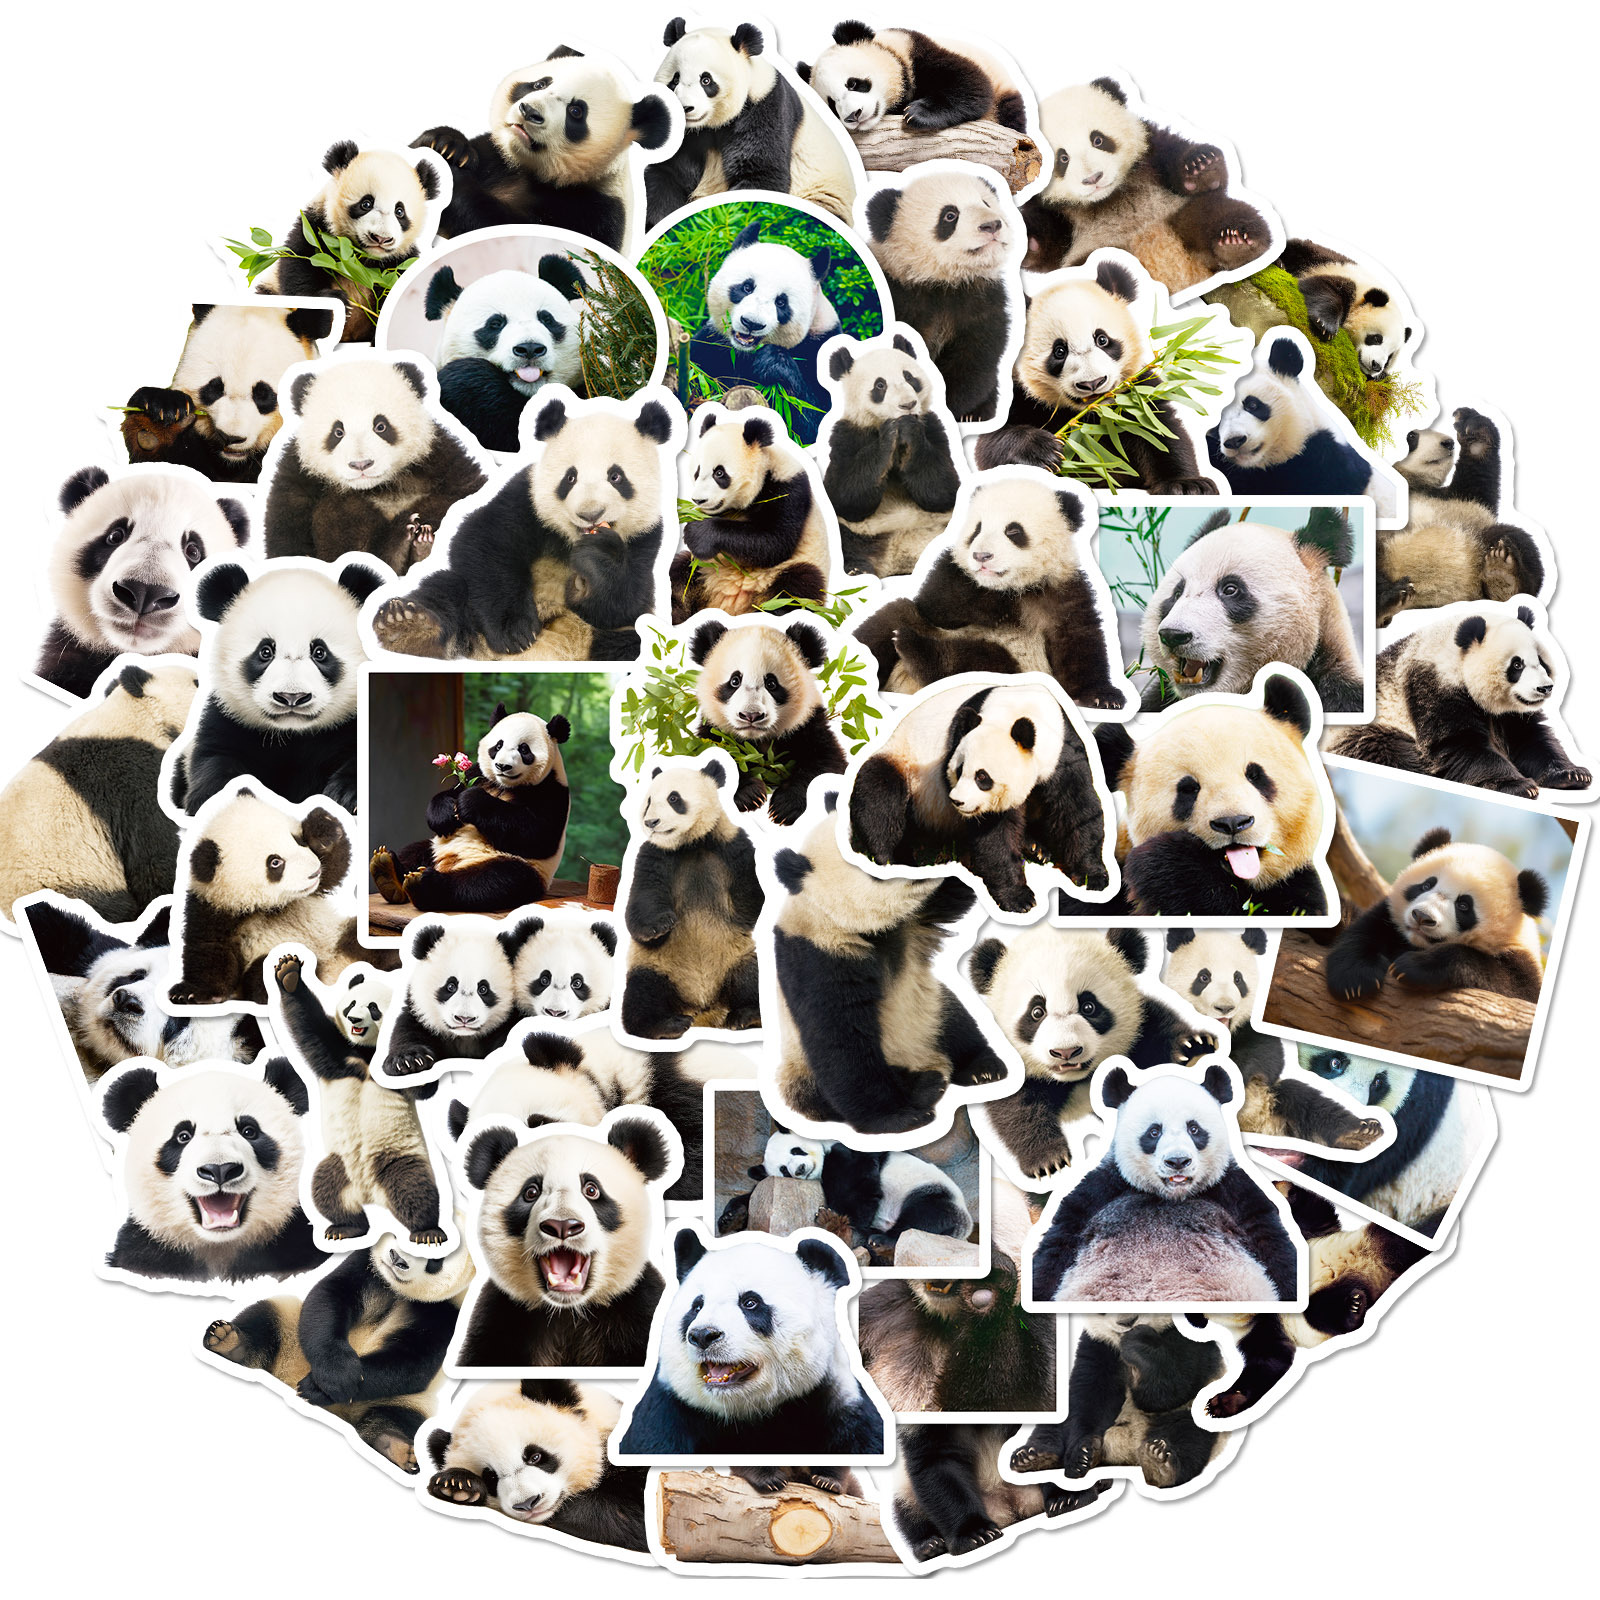 Panda Paradise: 50 Expressive Realistic Stickers for Tech & Drinkware